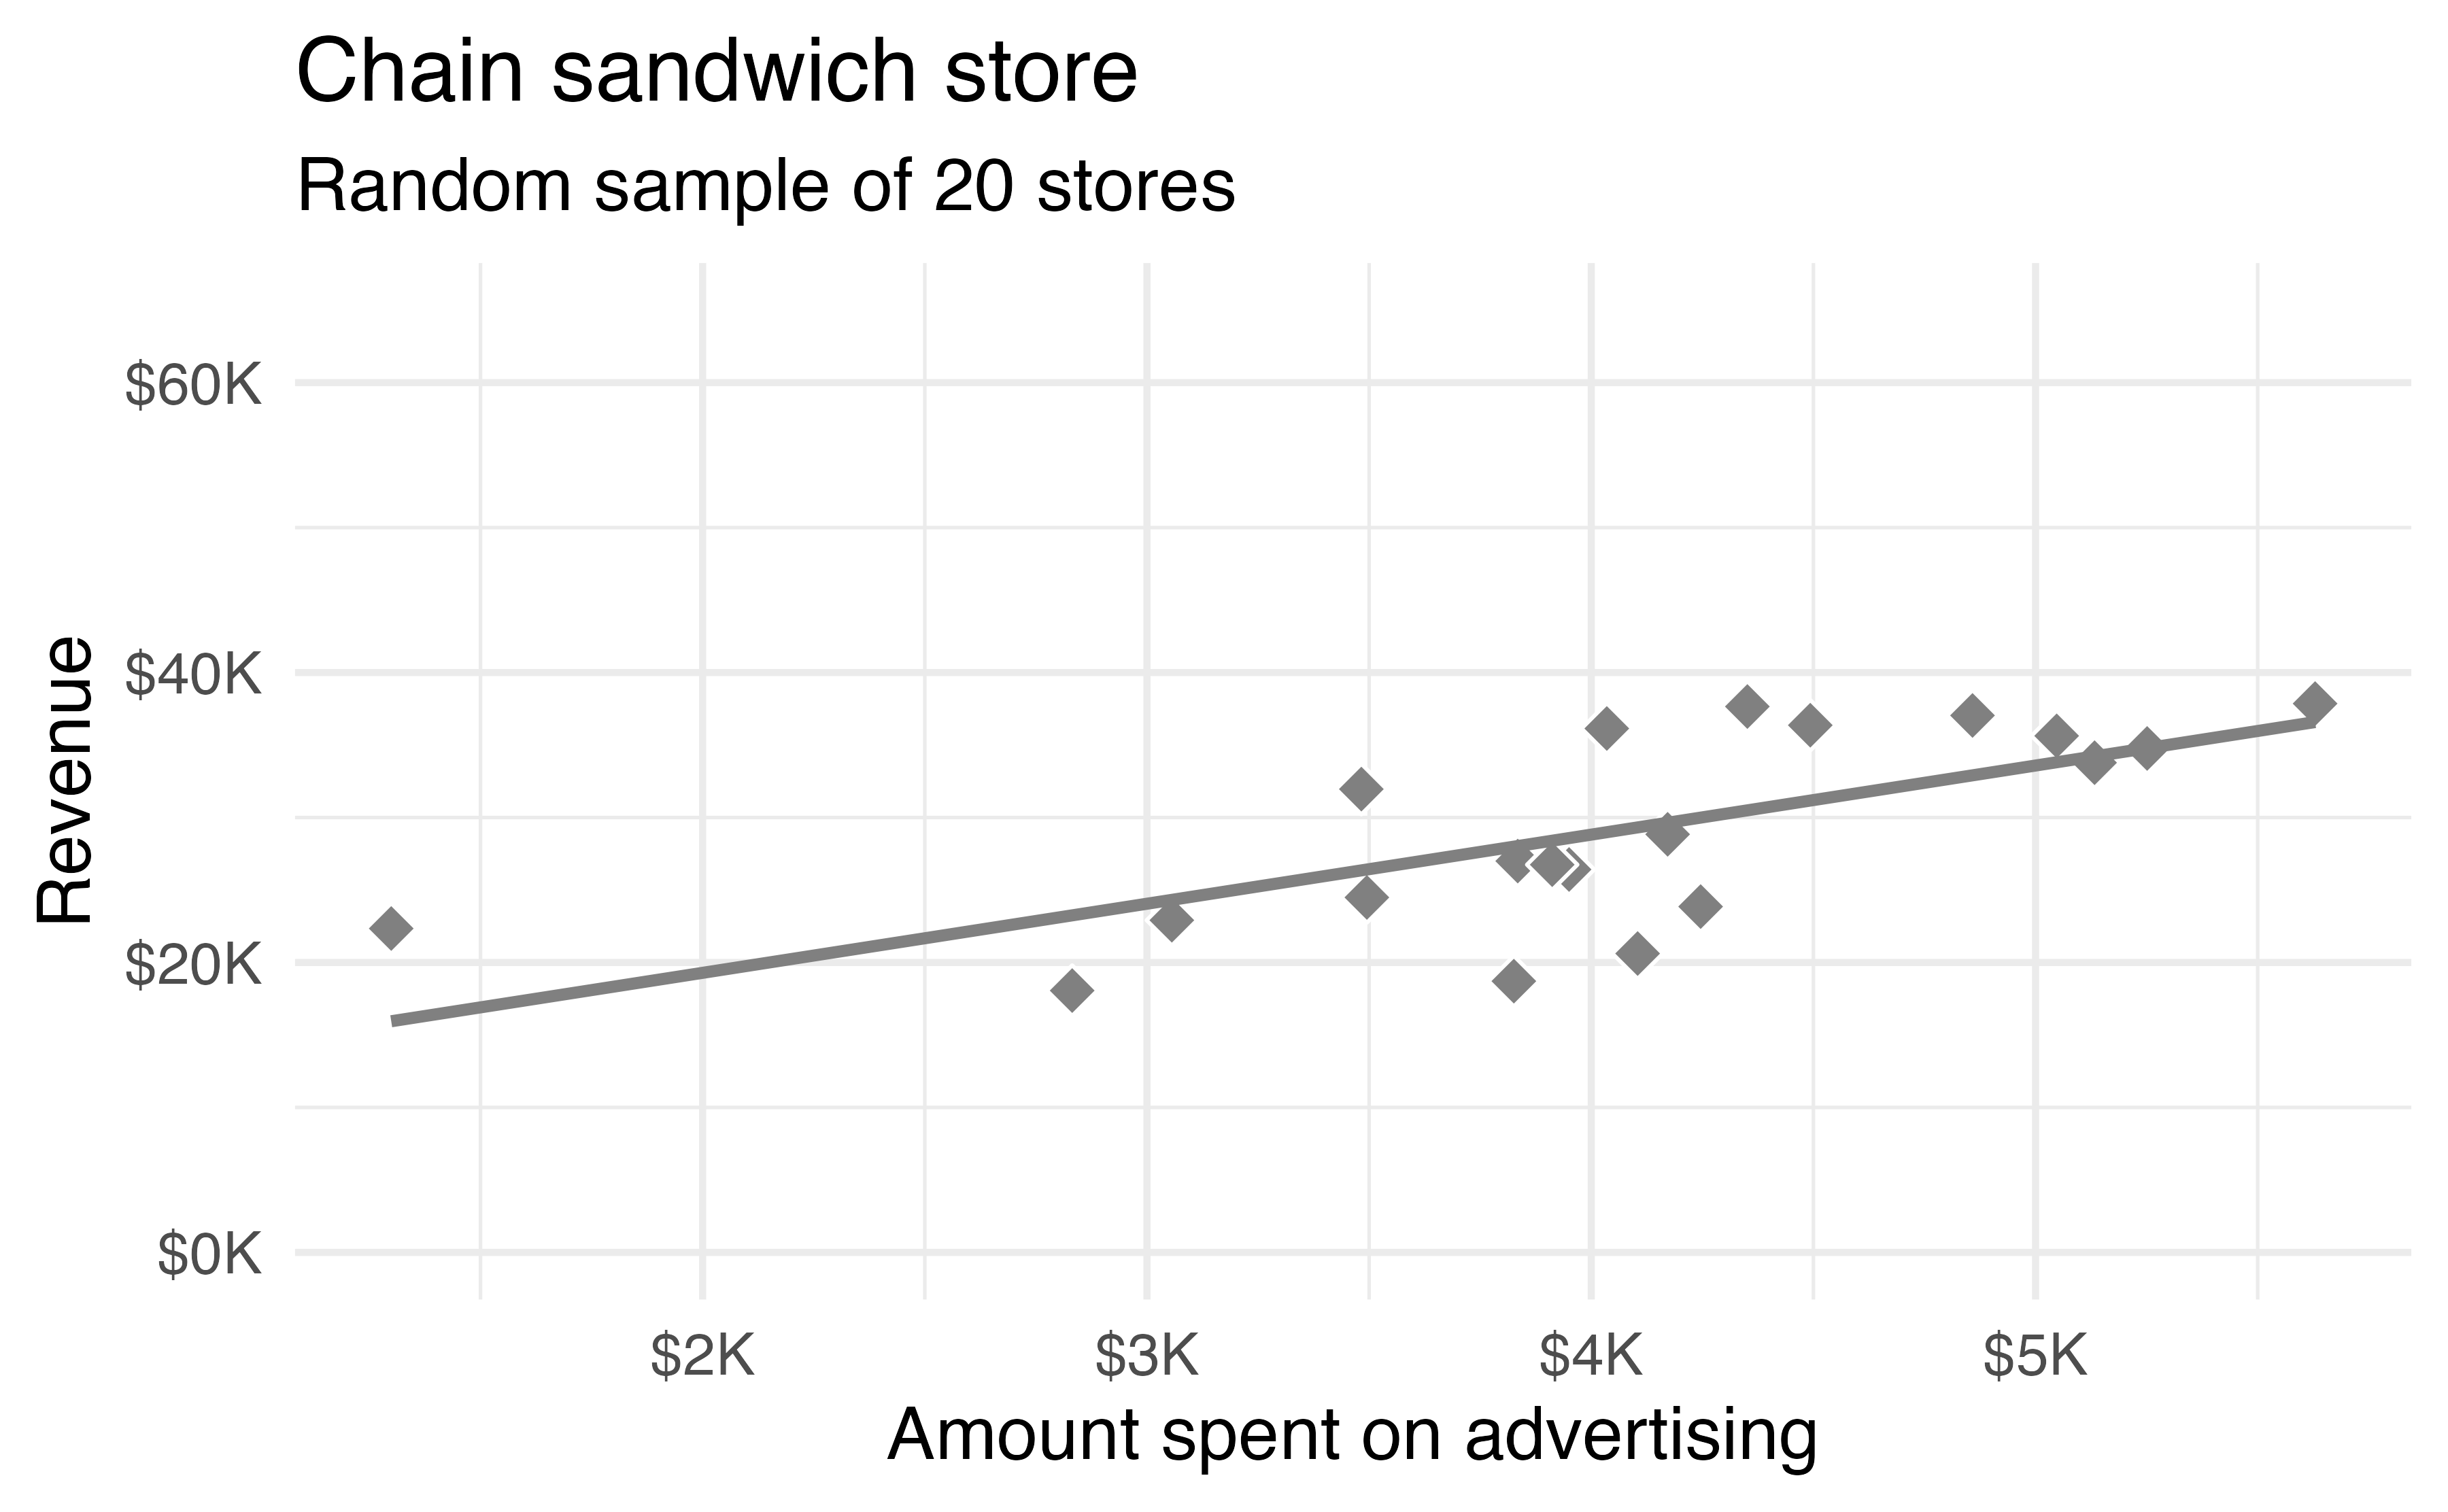 A different random sample of 20 stores from the entire population. Again, a linear trend between advertising and revenue is observed.